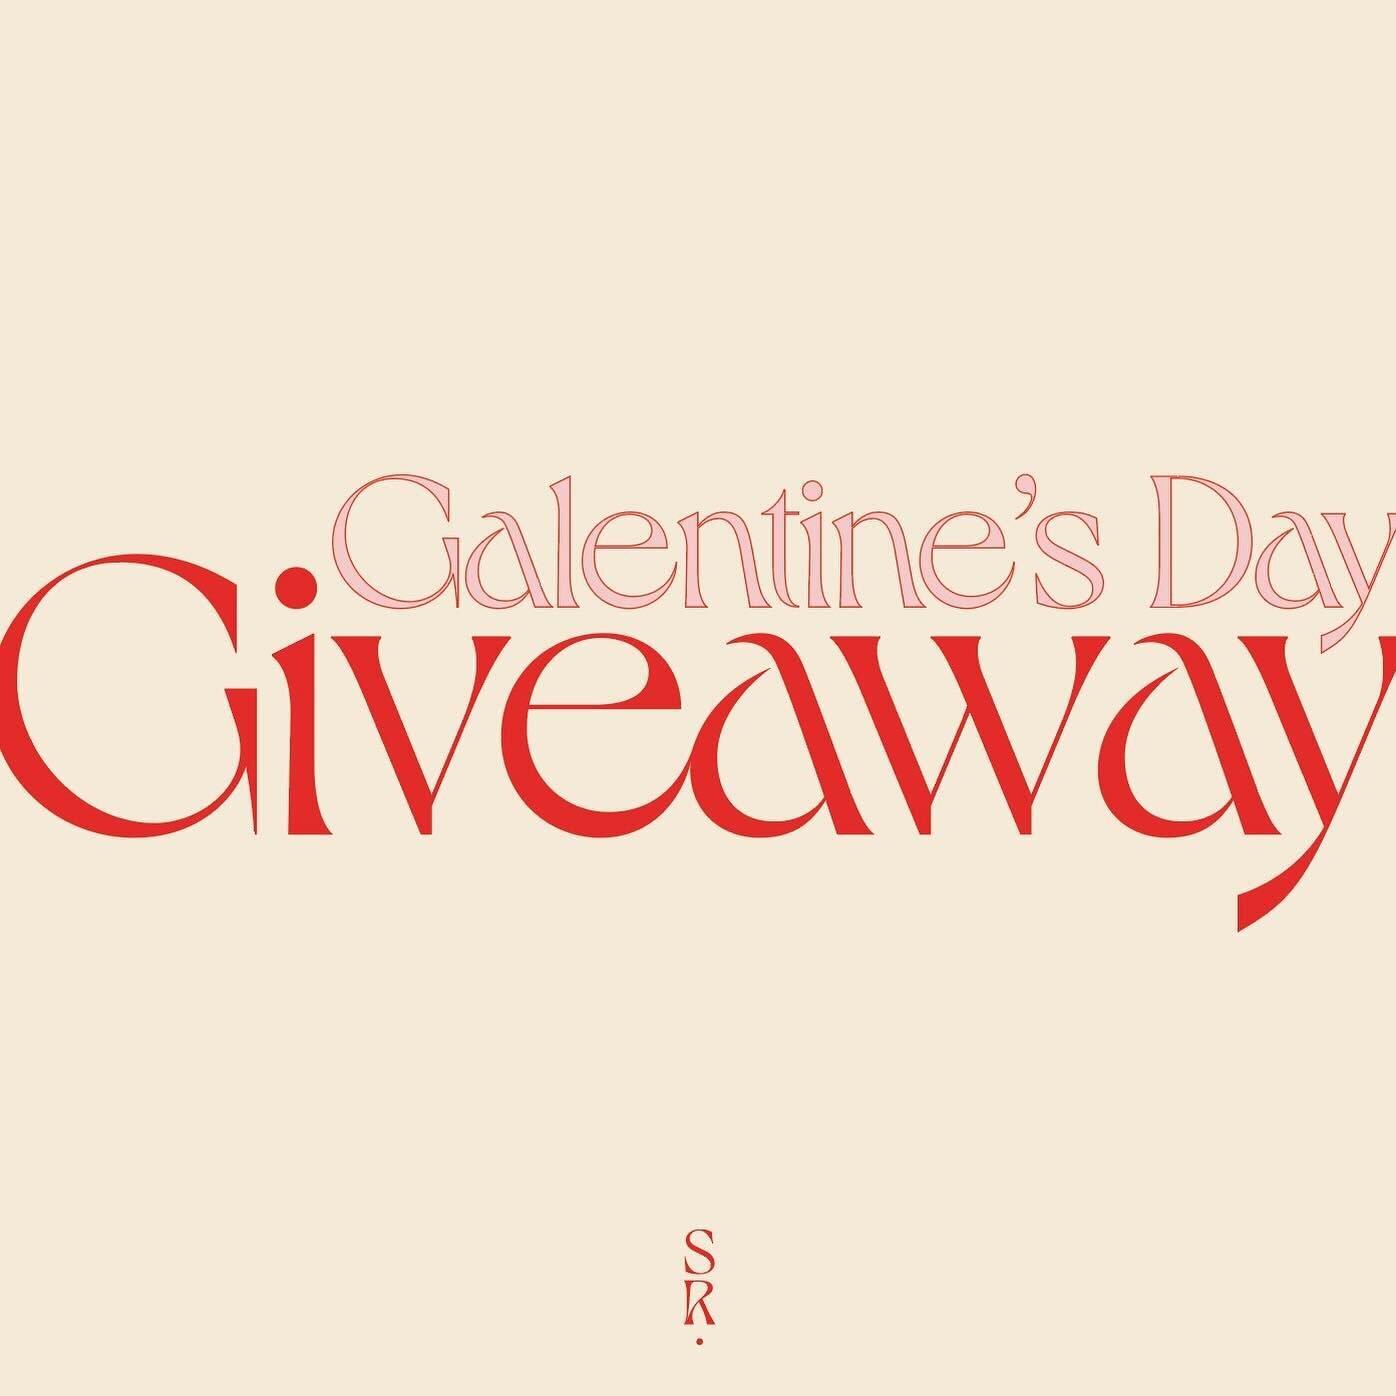 GALENTINE&rsquo;S GIVEAWAY 💌🌹❤️

We&rsquo;re feeling the love today and want to share it with you! SO, we&rsquo;re giving TWO besties a Hair Treatment Makeover! 

What you&rsquo;ll BOTH get: 
💌 In-salon treatment: Scalp Scrub, Acidic Bonding Conce